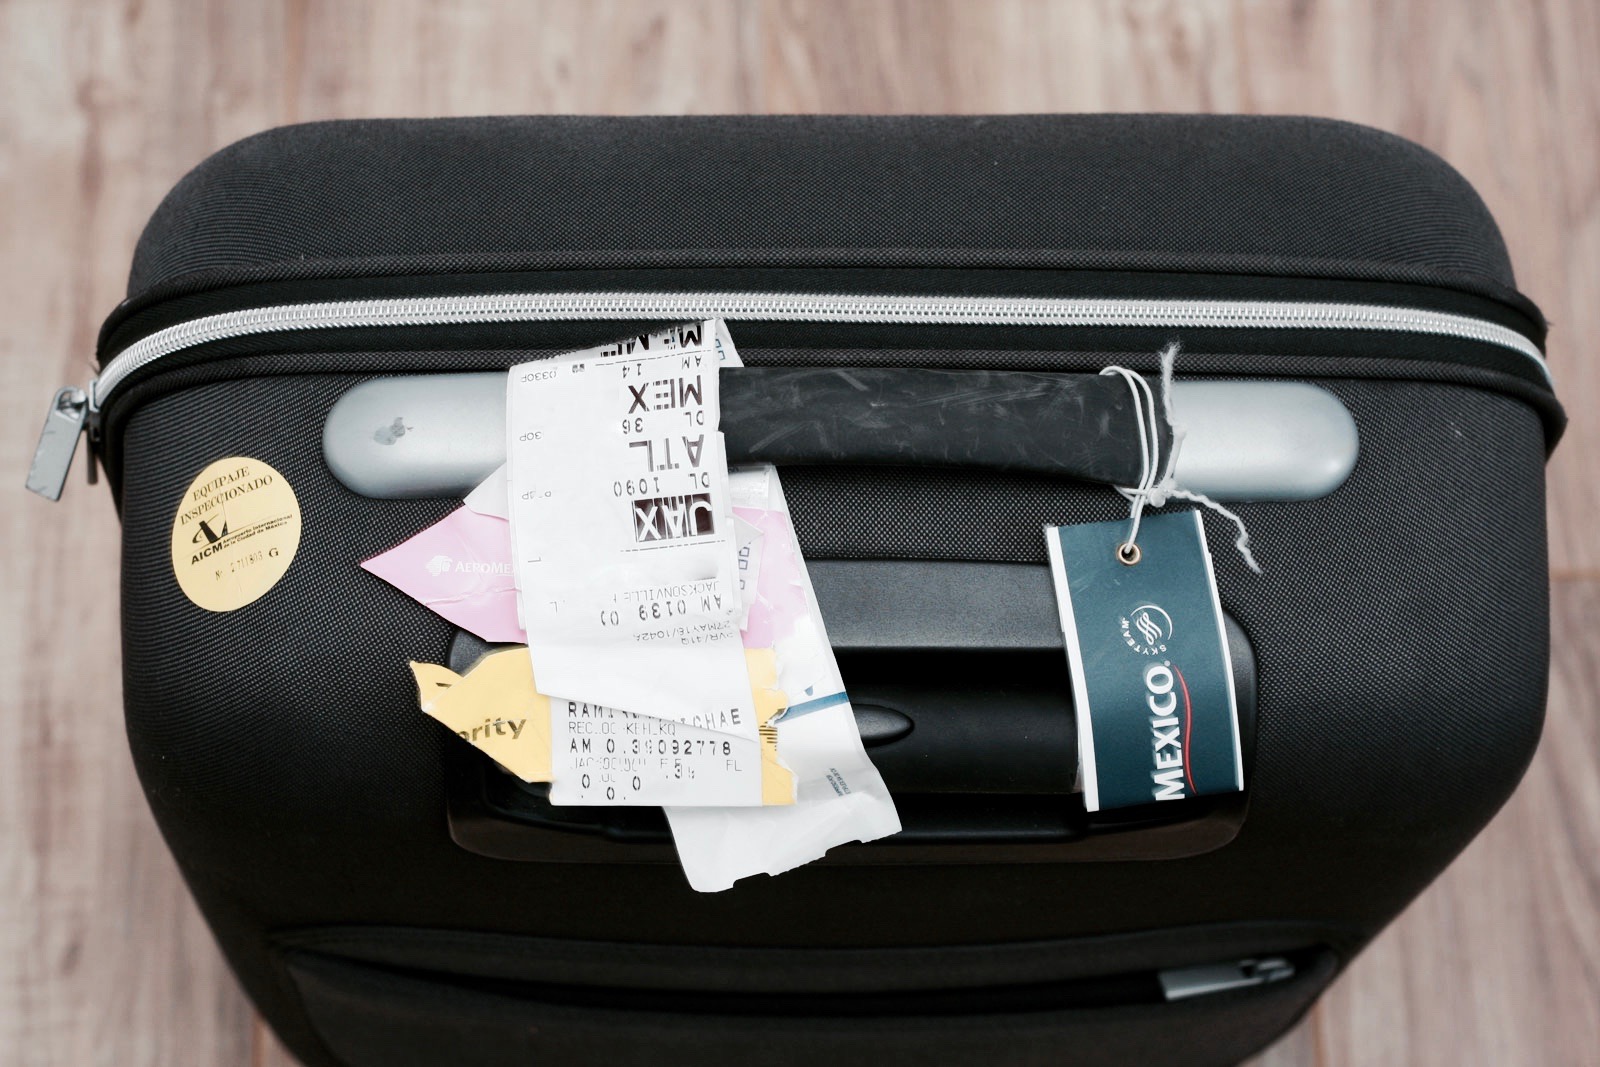 A suitcase with bag tags